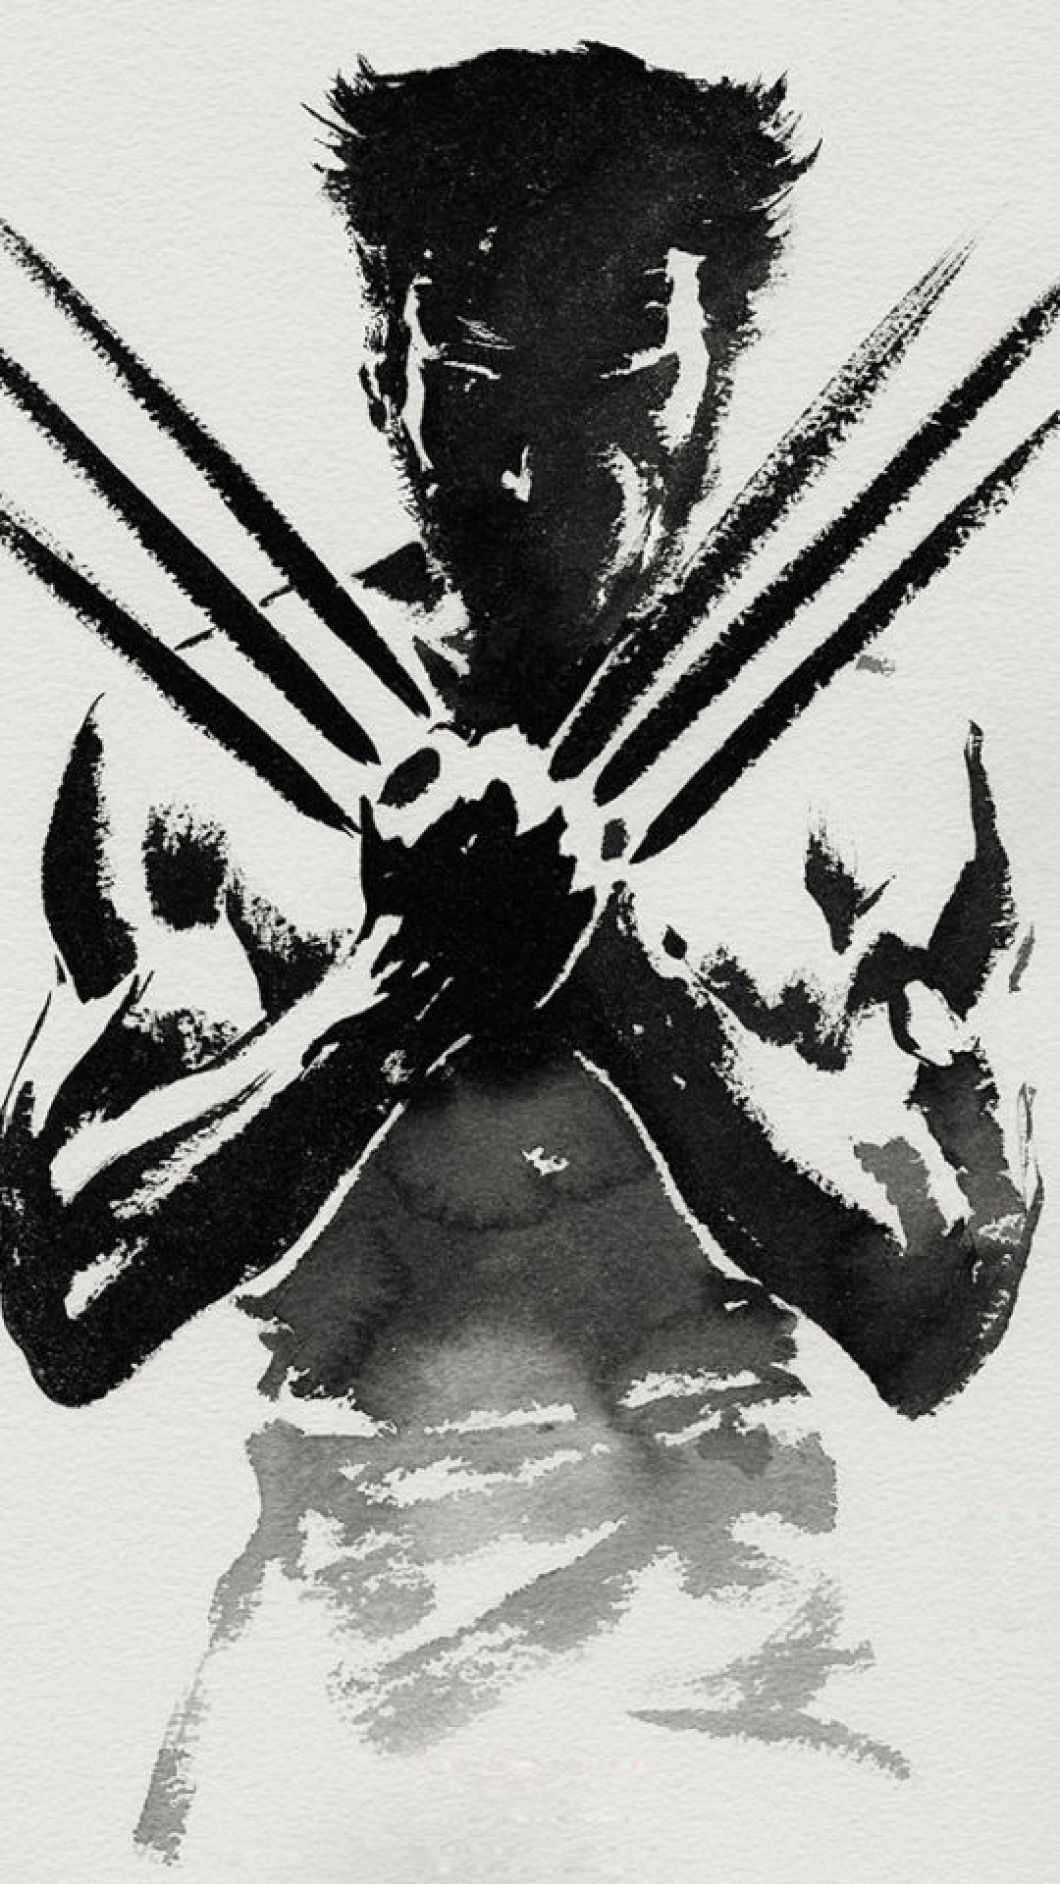 wolverine wallpaper,wolverine,illustration,fictional character,graphic design